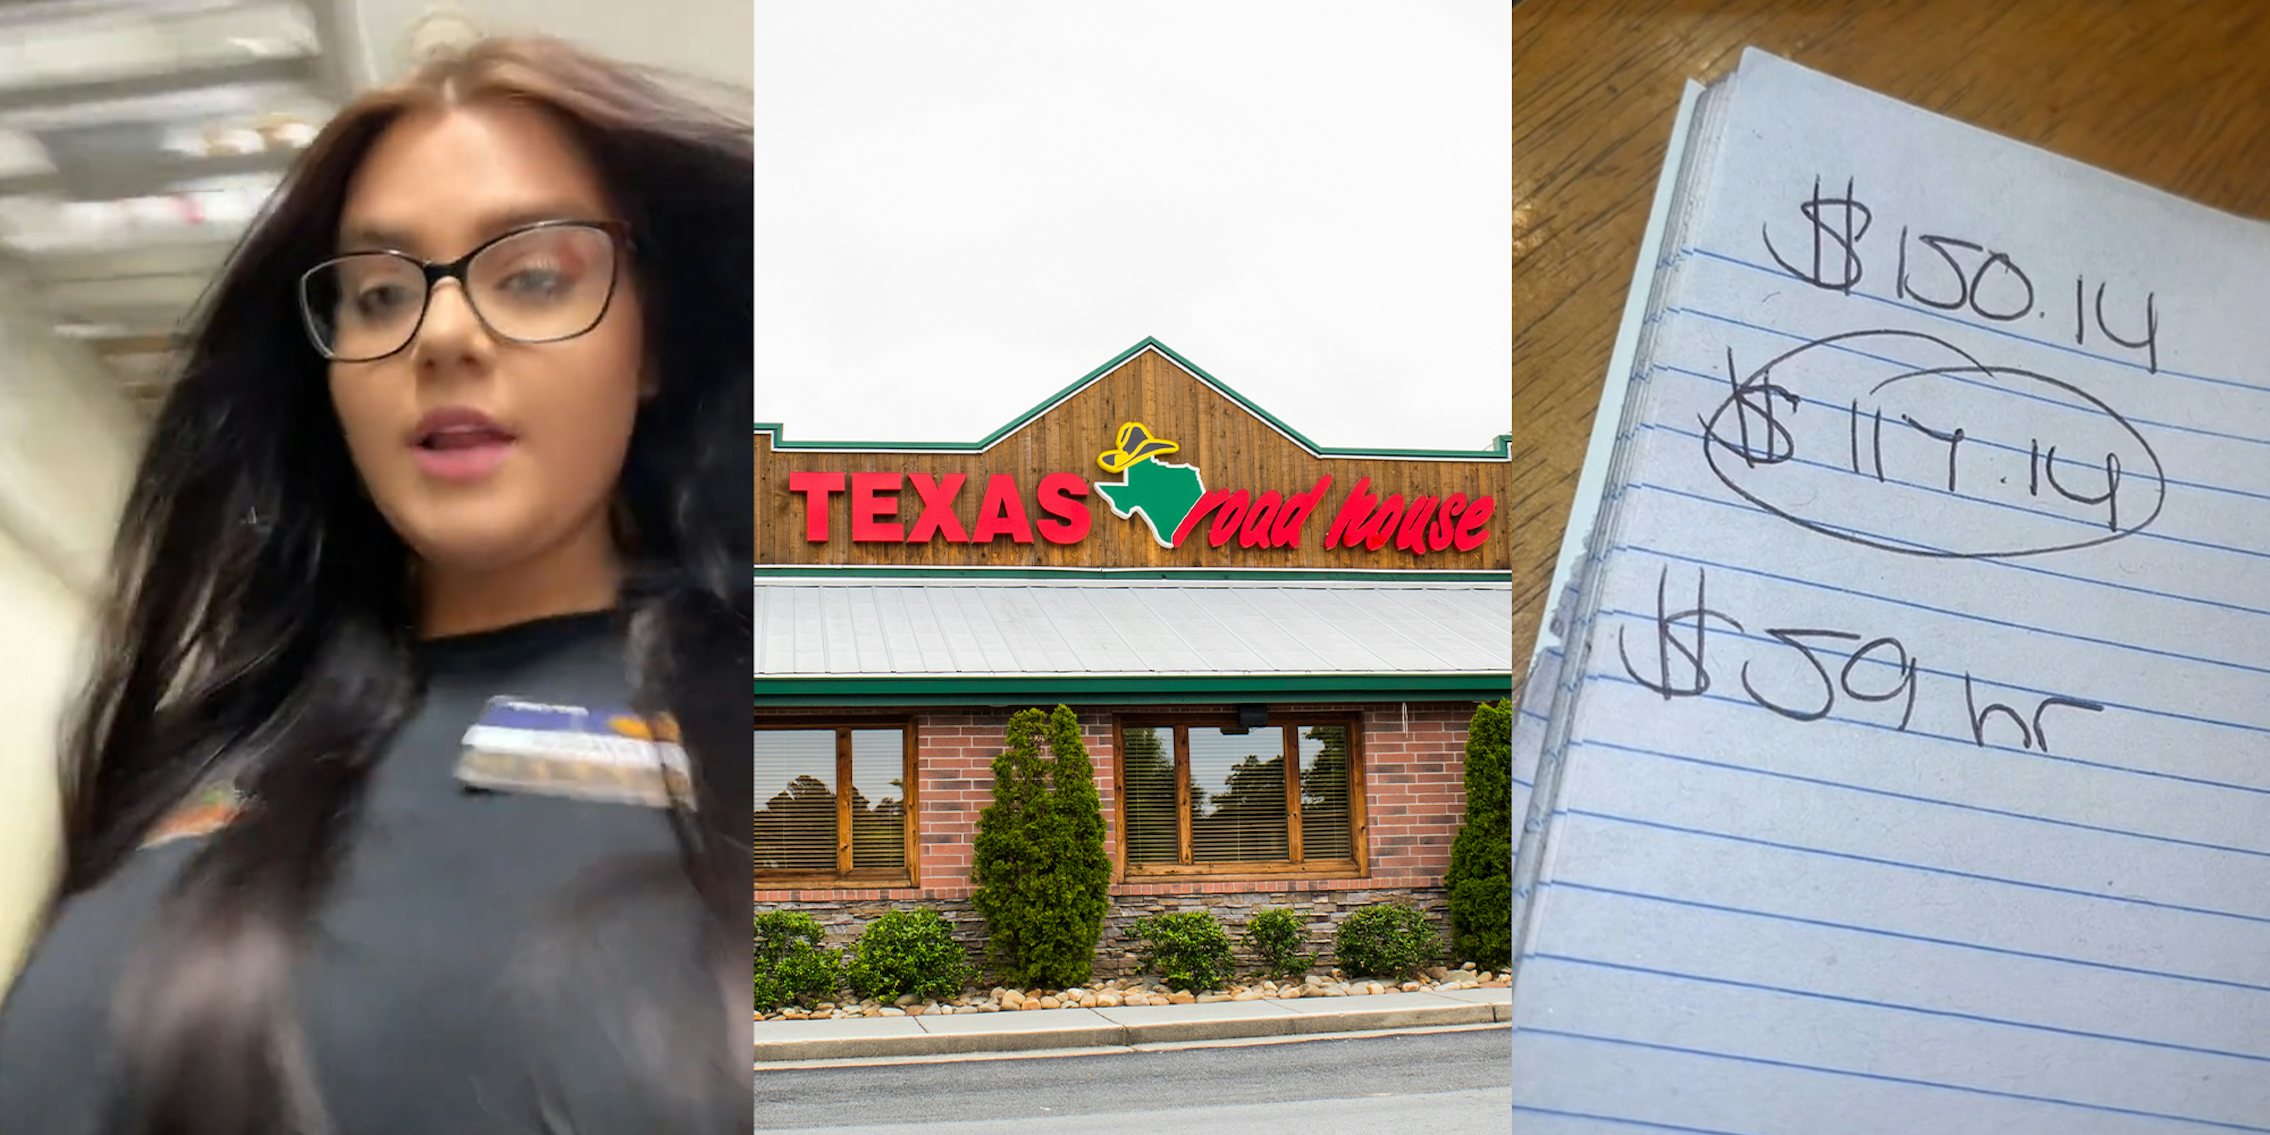 Server shares how much she made during a 3-hour shift at Texas Roadhouse.